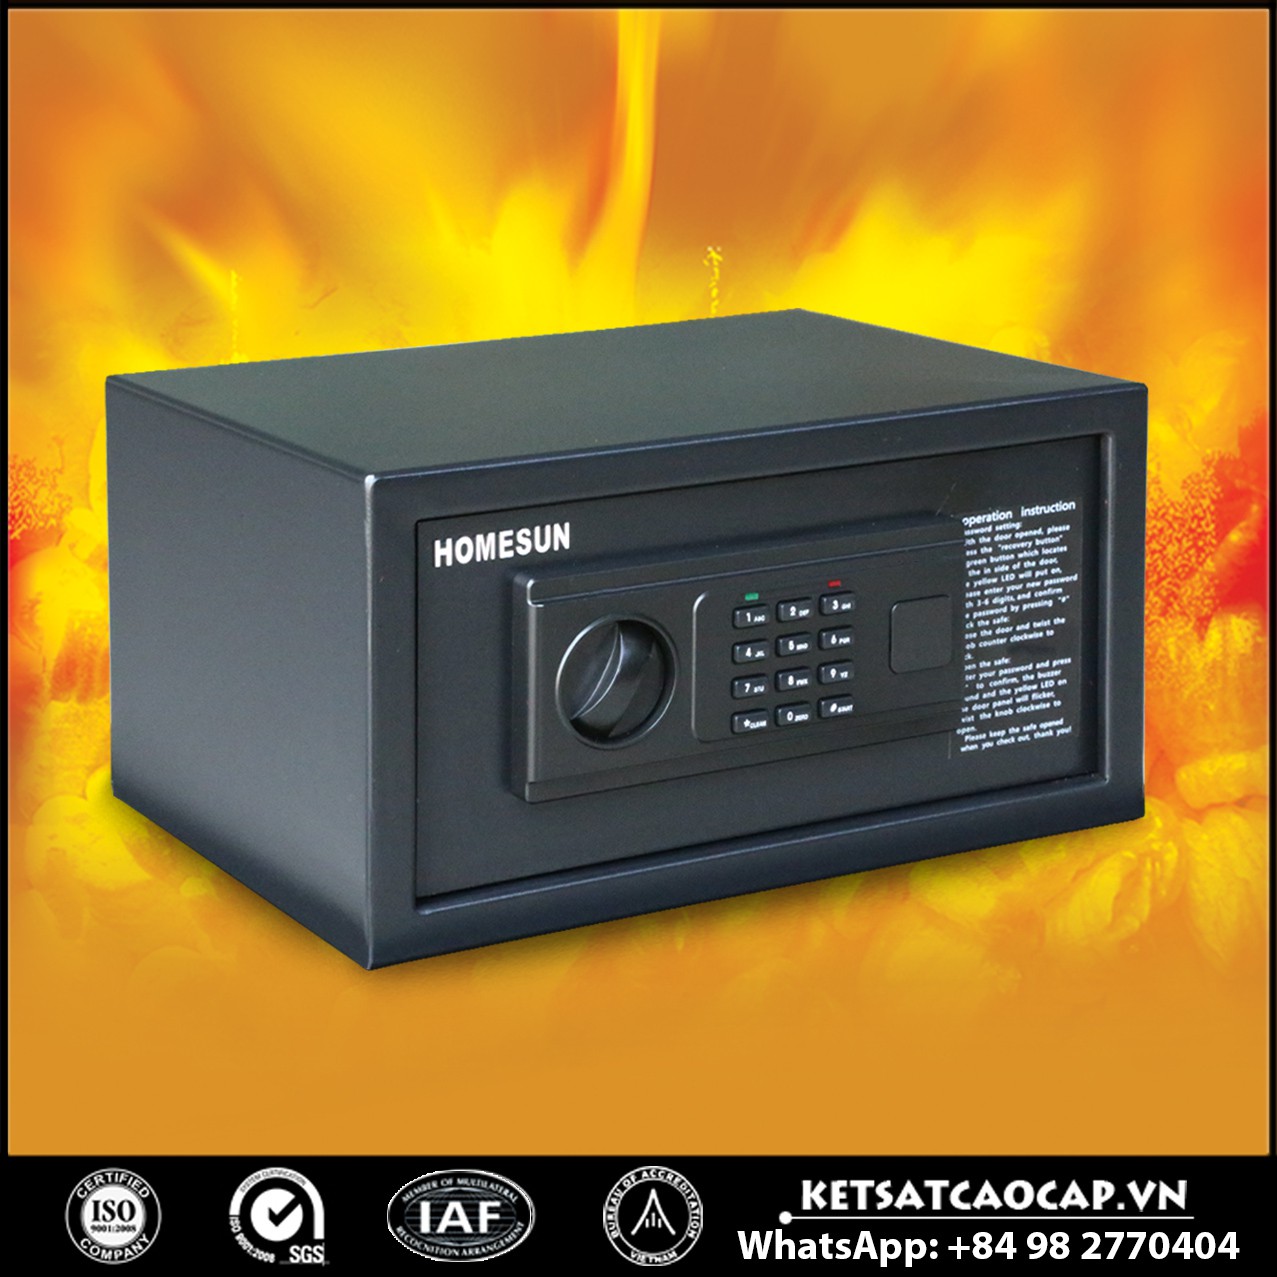 Best Sellers In Hotel Safes Manufacturers